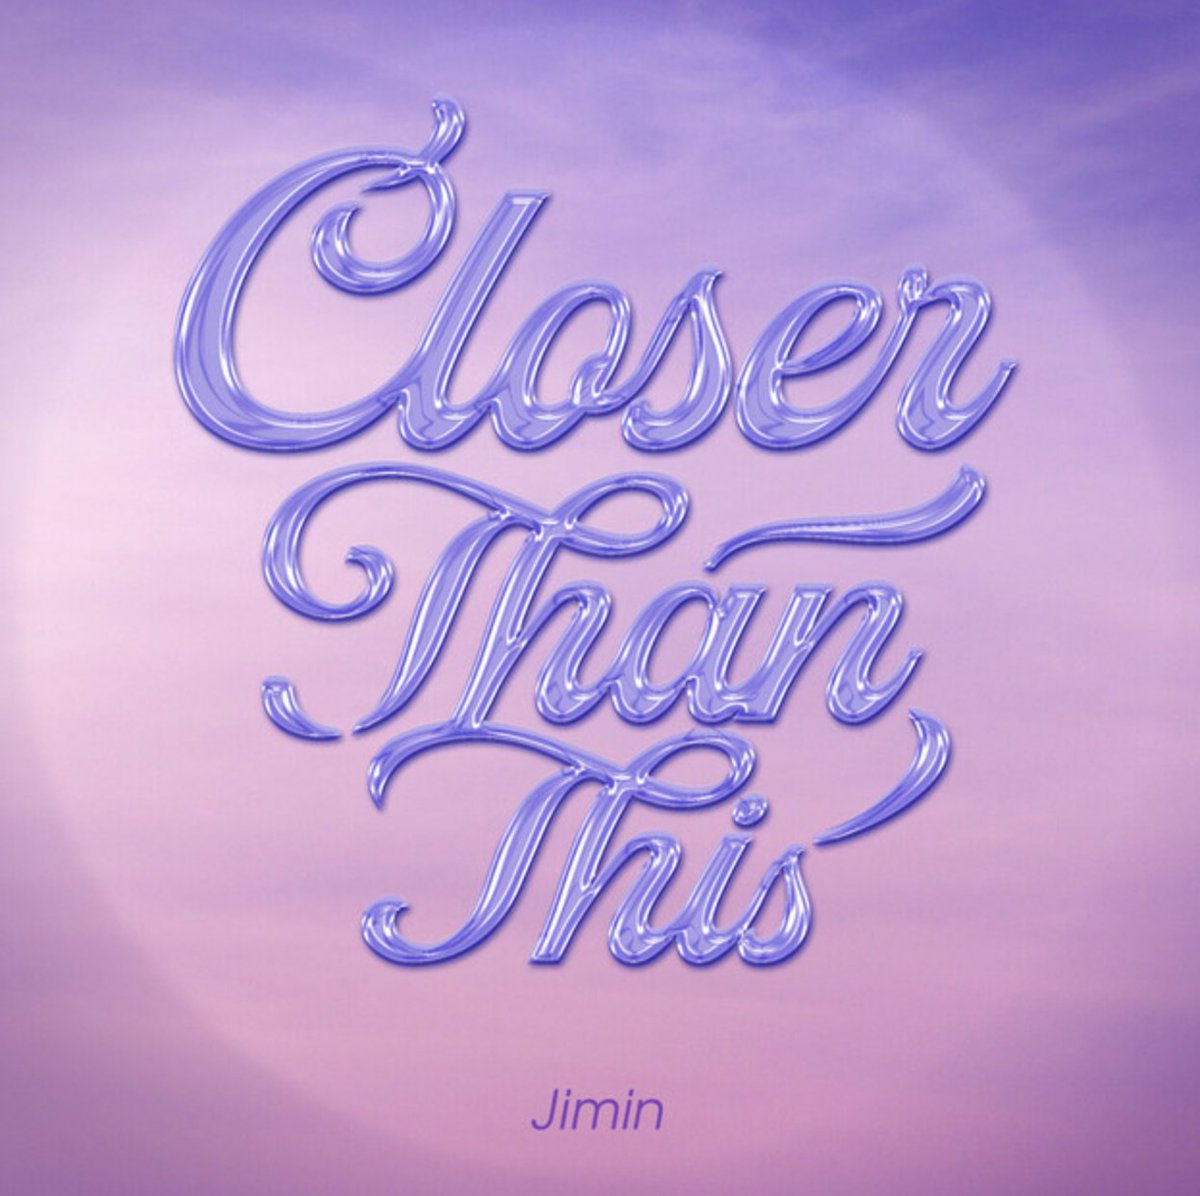 'Closer Than This' by Jimin is out now! open.spotify.com/track/3k6q0O9J…